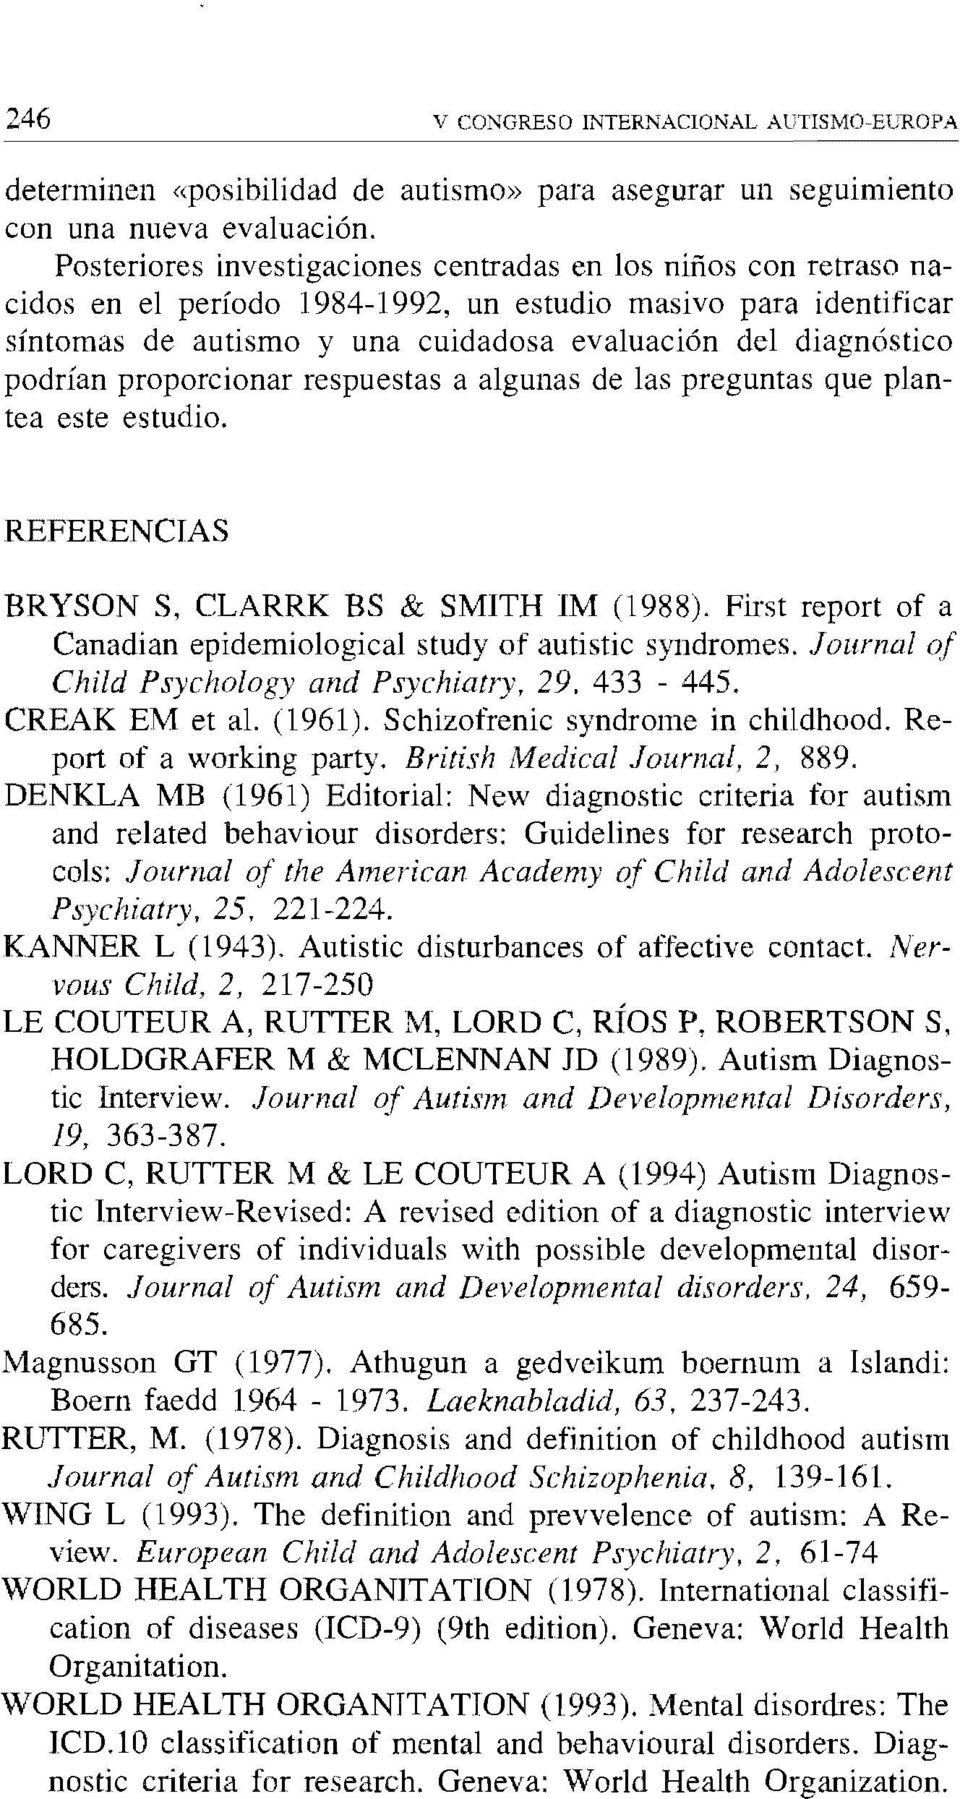 DENKLA MB (1961) Editorial: New diagnostic critería for autism and related behaviour disorders: Guidelines for research protocok Journal o/ the American Academy o/ Child and Adolescent P!